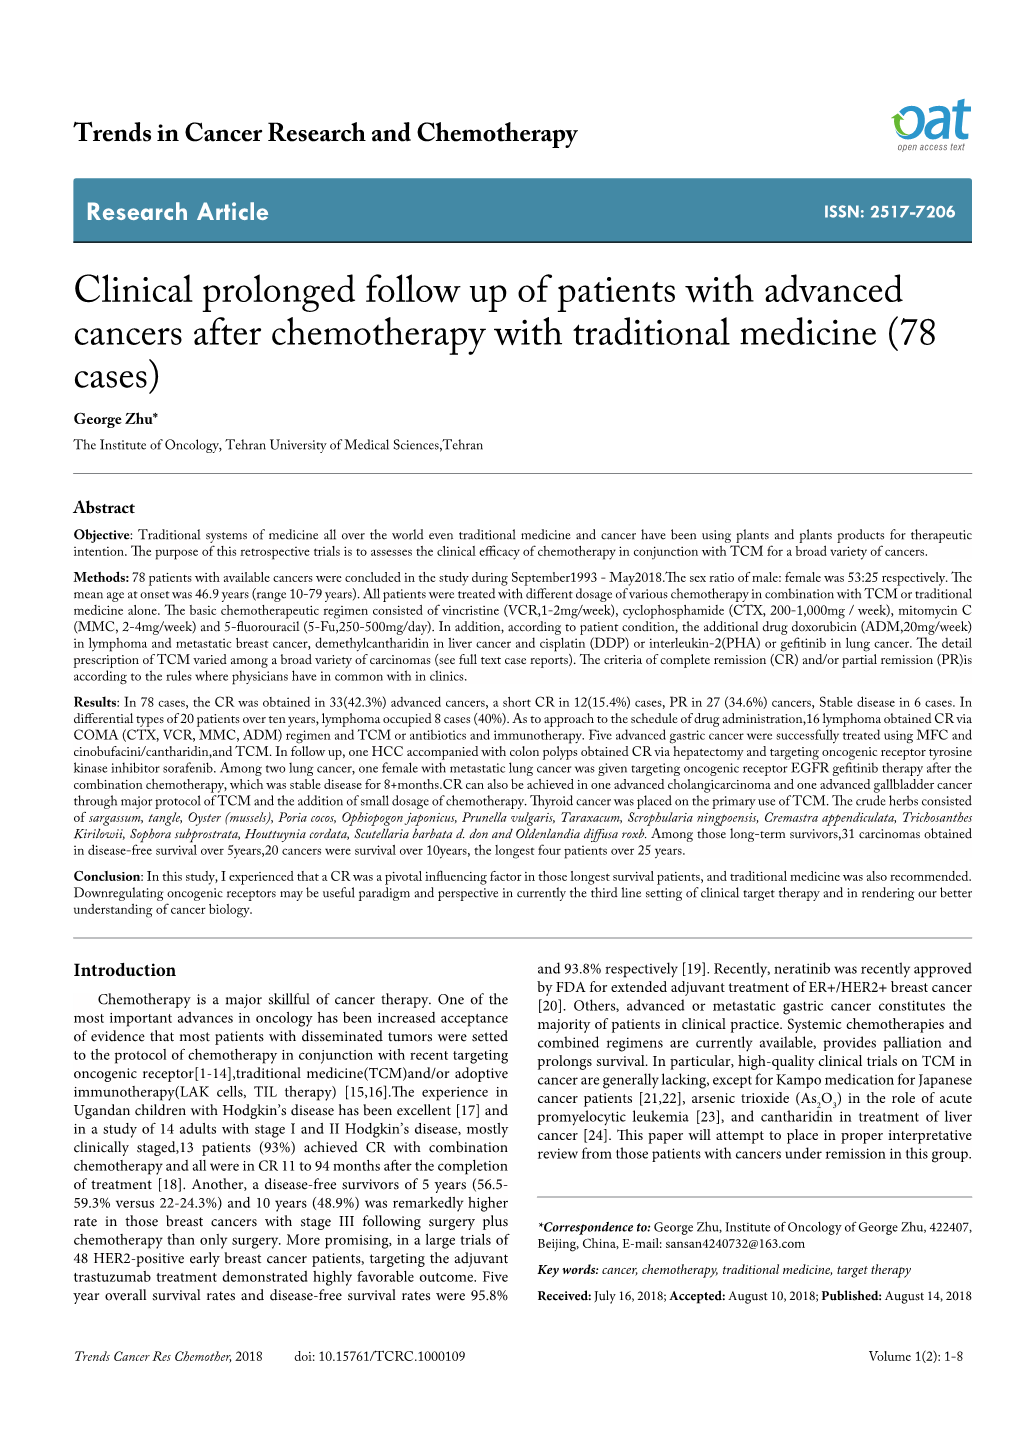 Clinical Prolonged Follow up of Patients With